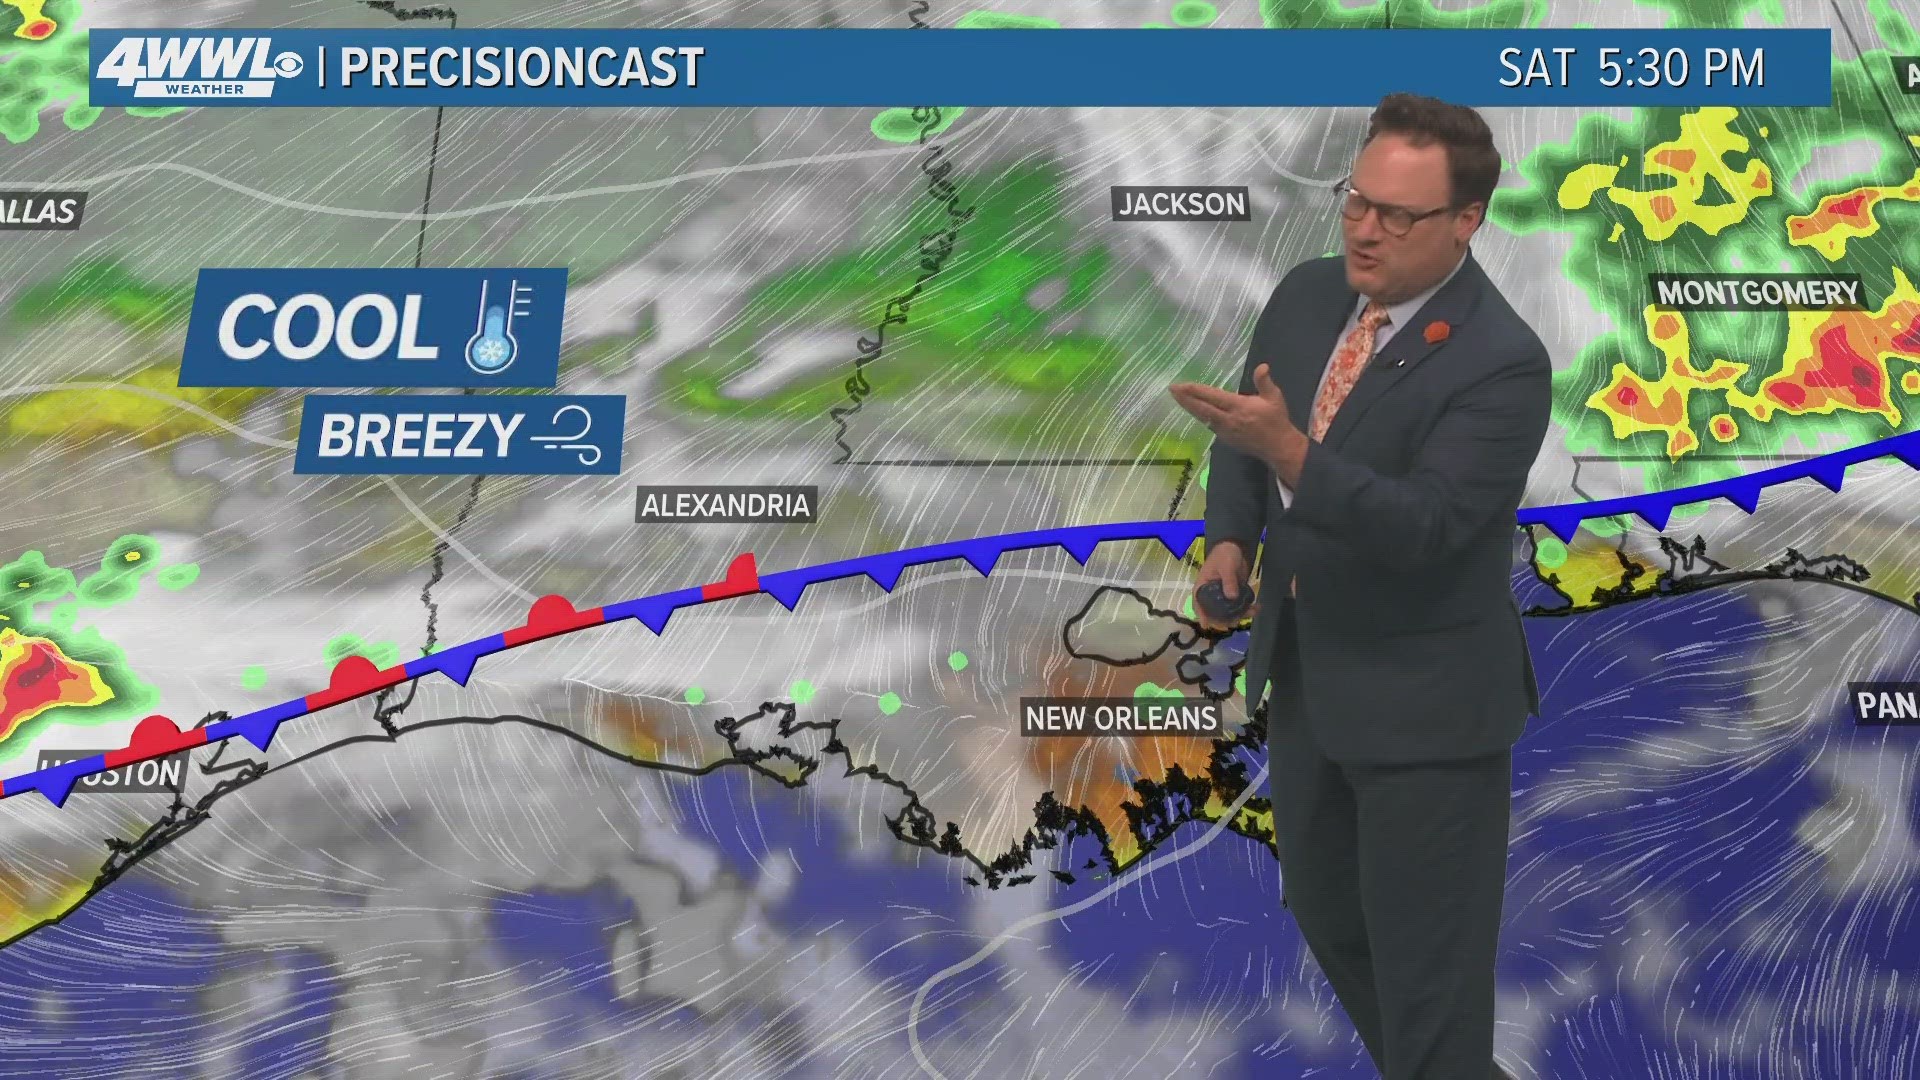 Chief Meteorologist says Saturday will be mostly cloudy, rainstorms expected Sunday and a cold front moves in.